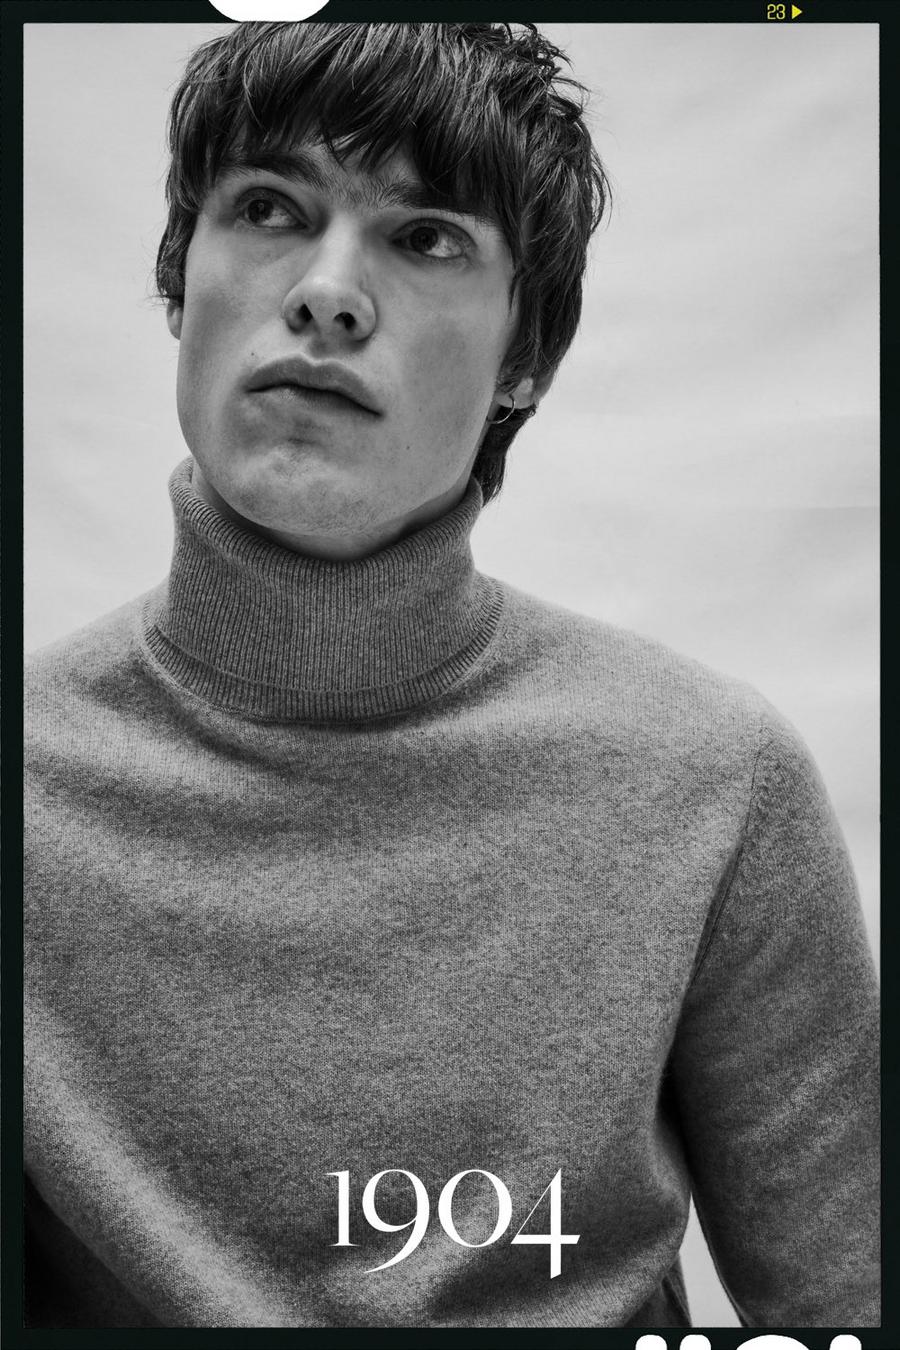 1904 Wool Blend Roll Neck Jumper With Cashmere